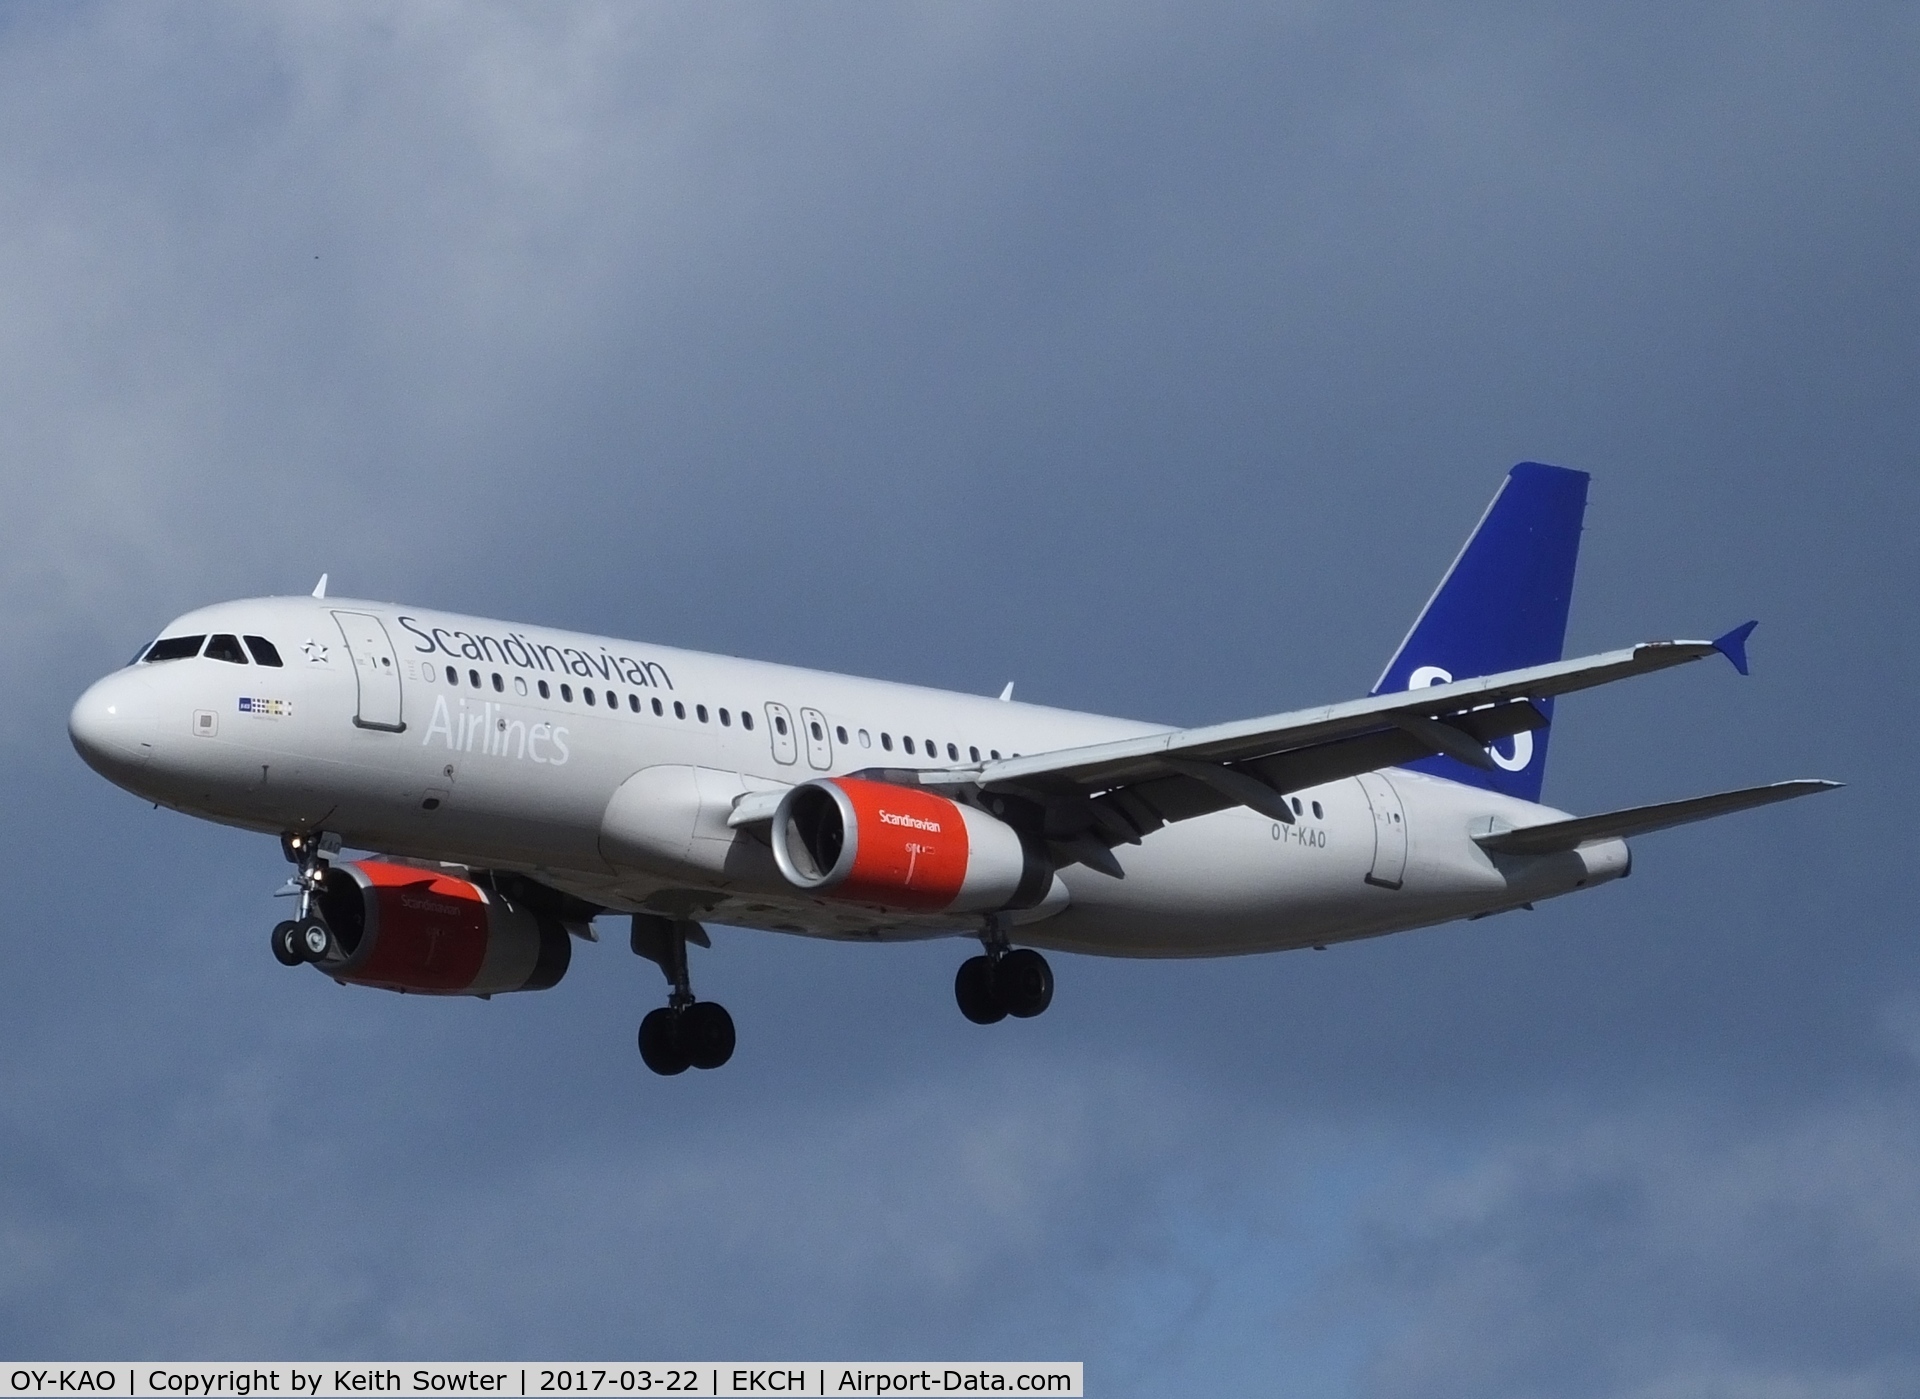 OY-KAO, 2006 Airbus A320-232 C/N 2990, Short finals to land at Copenhagen